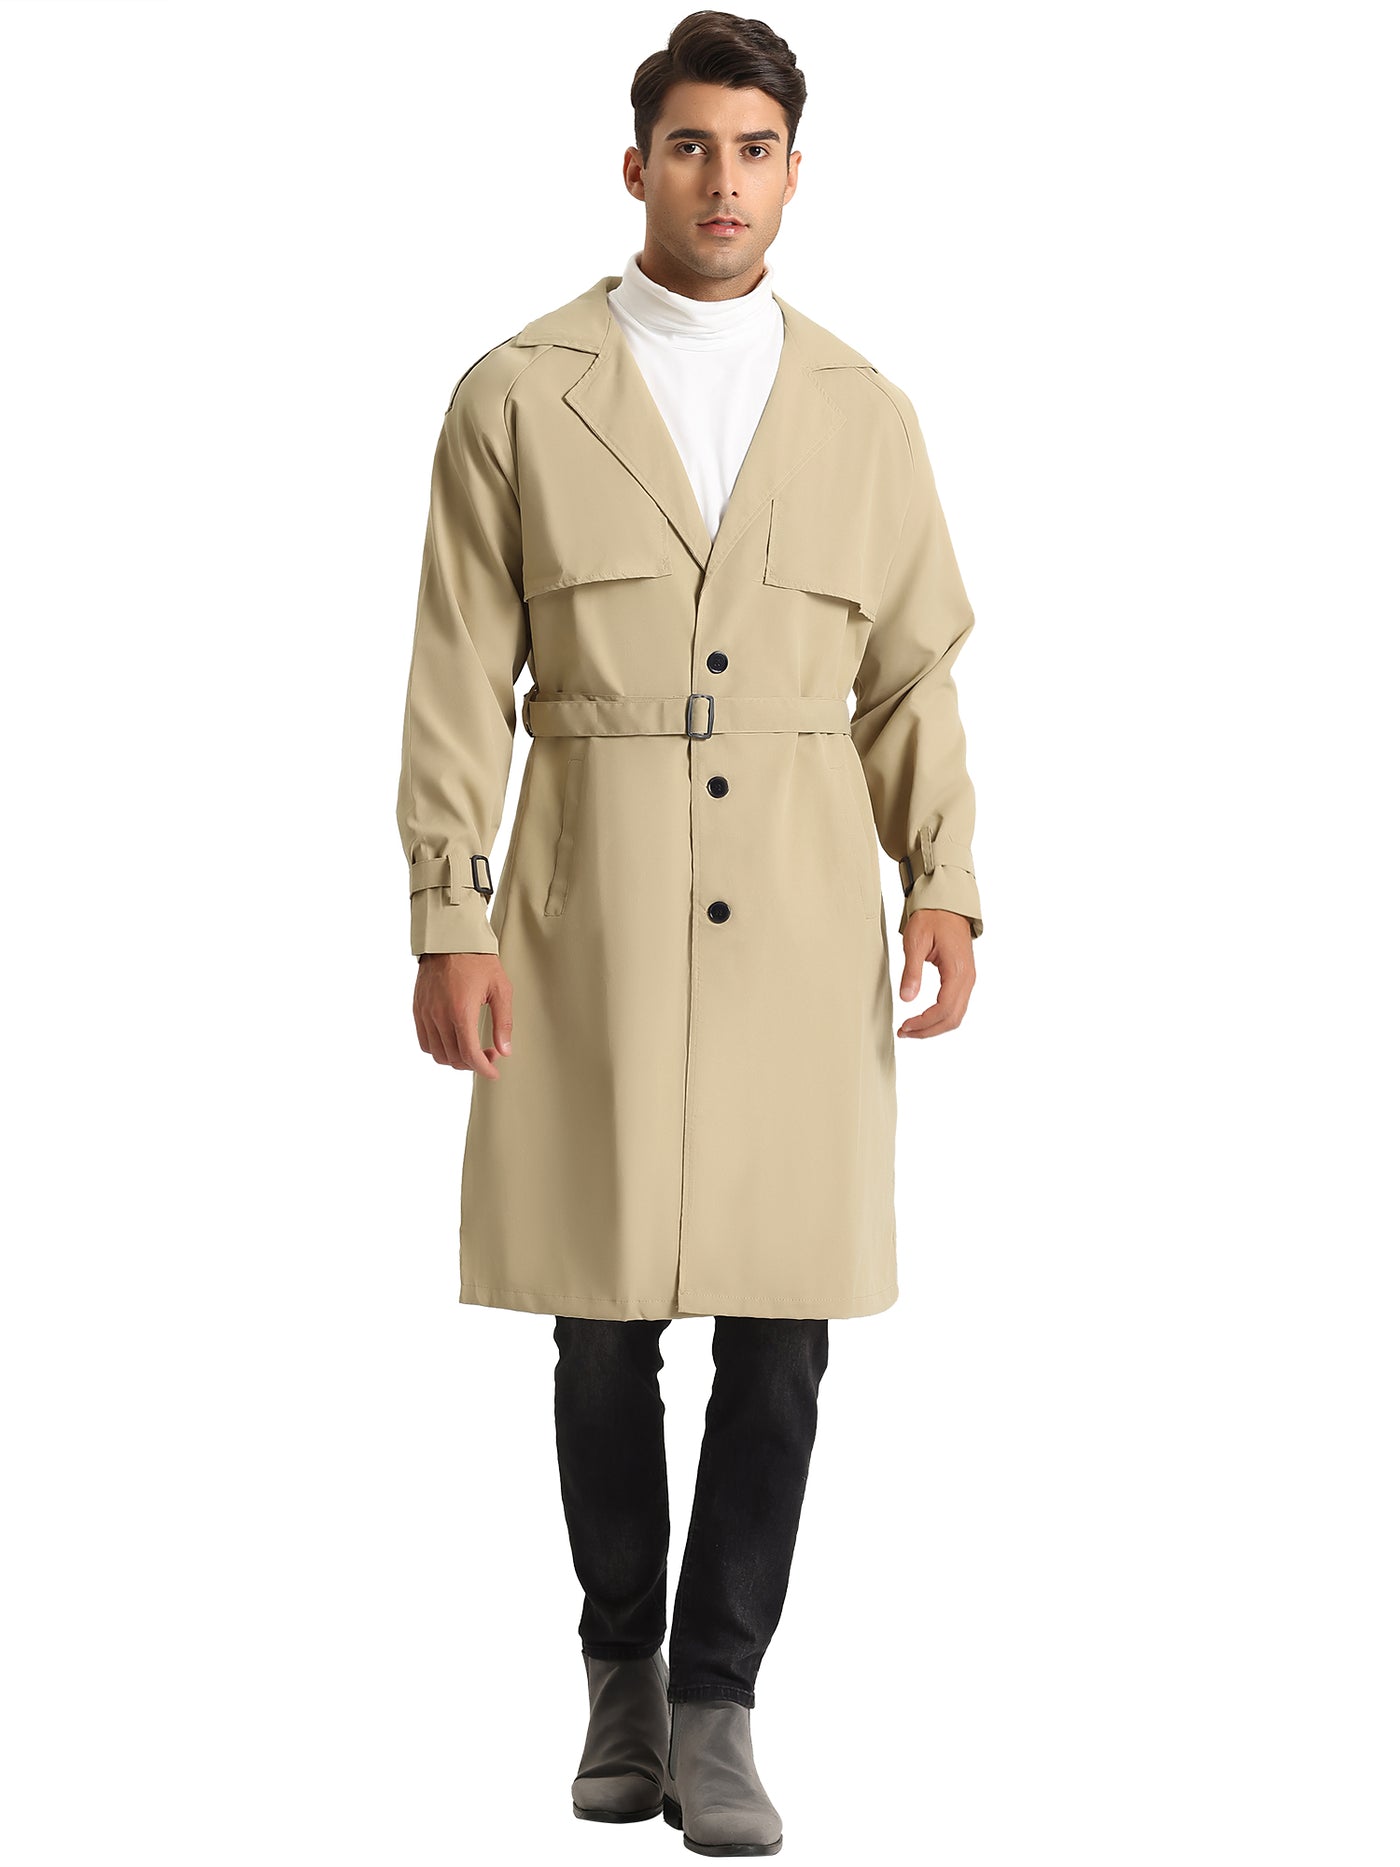 Bublédon Trench Coat for Men's Casual Double Breasted Winter Belted Long Jacket Overcoat